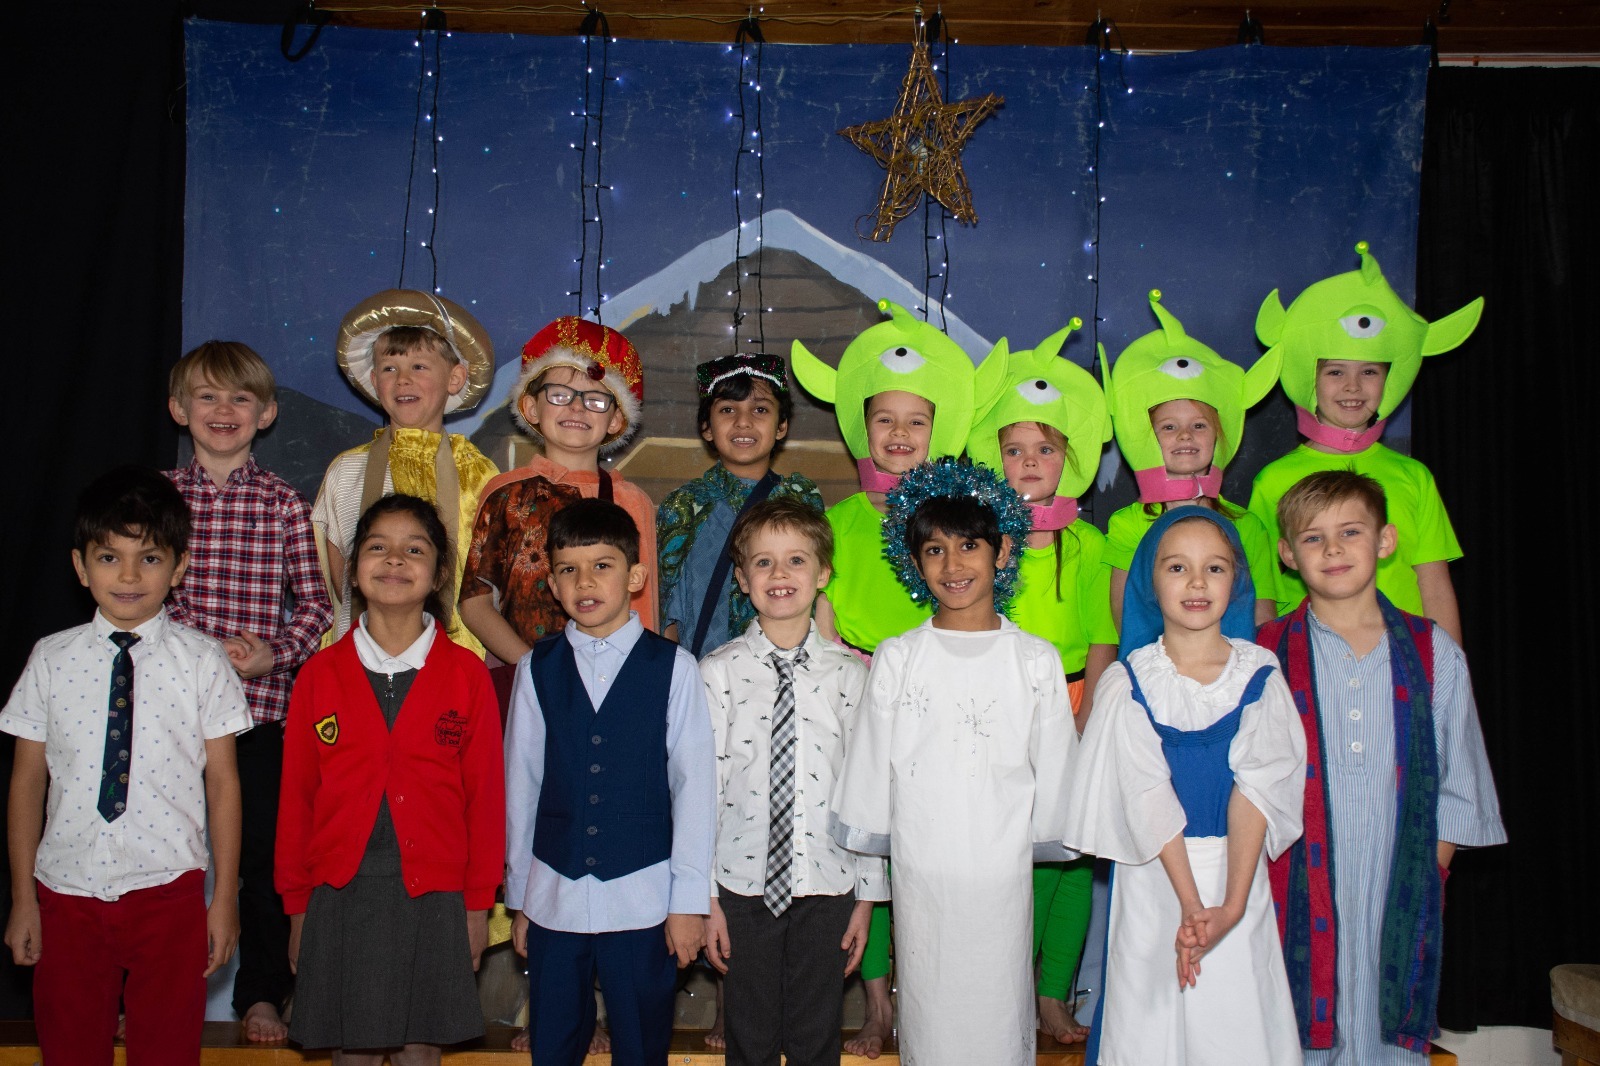 Children taking part in a nativity play at the school